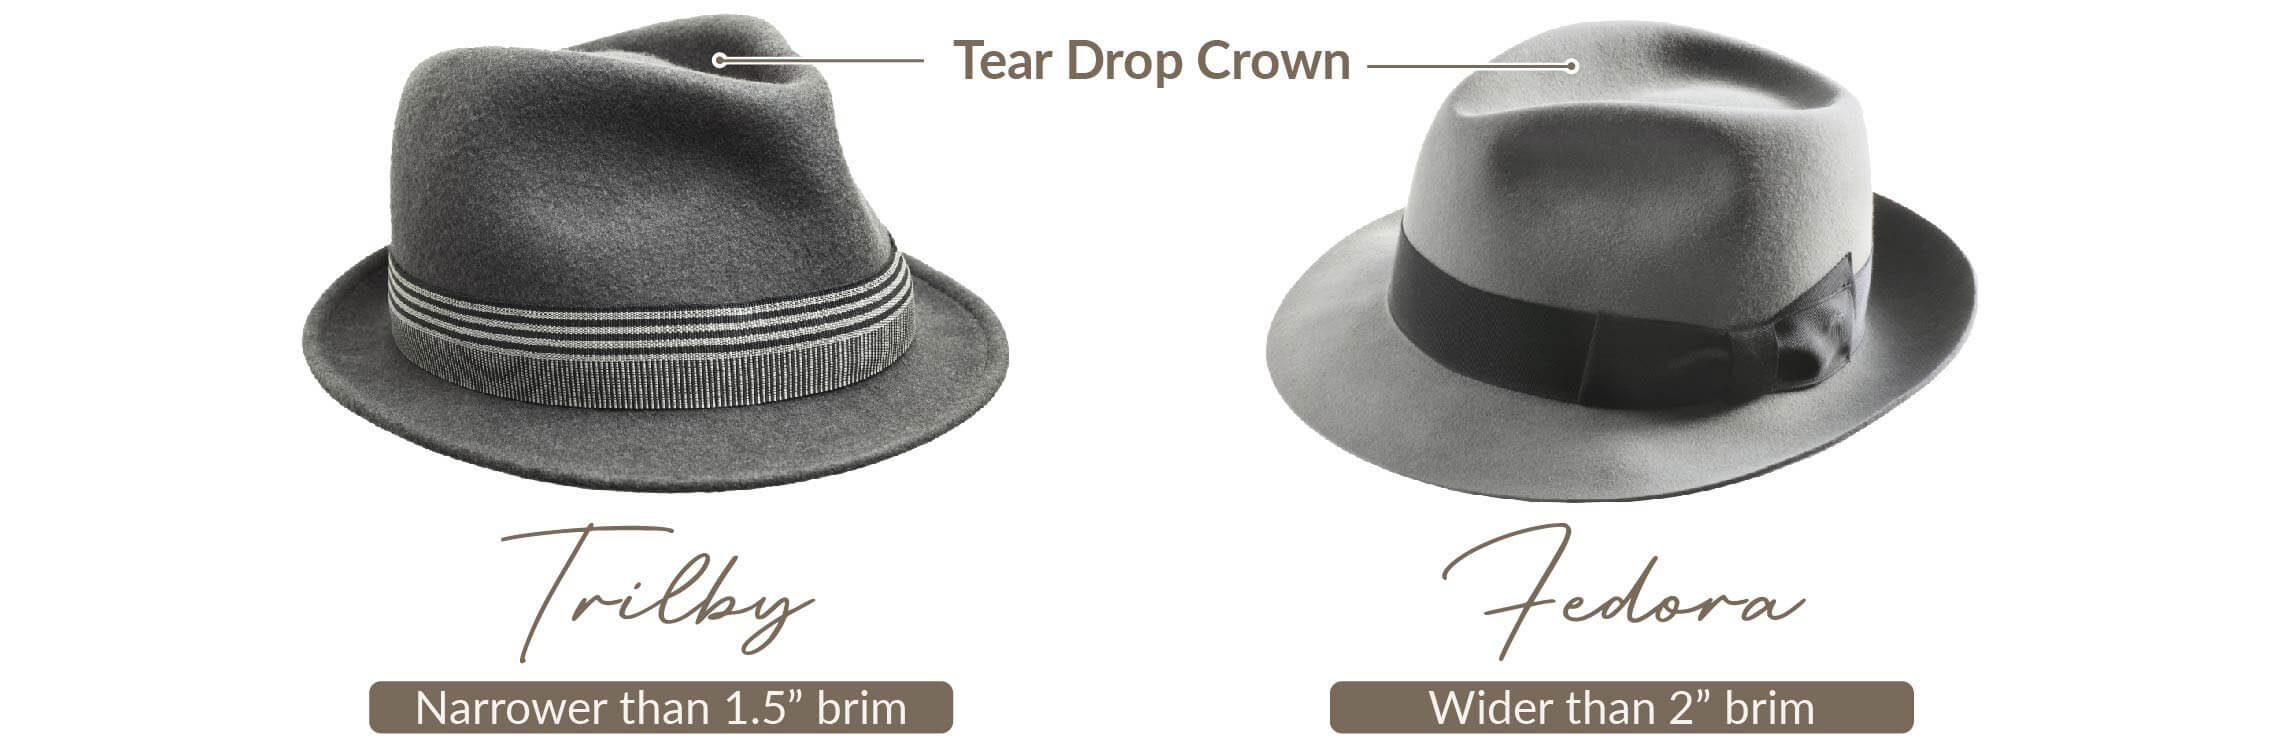 trilby vs fedora what is the difference